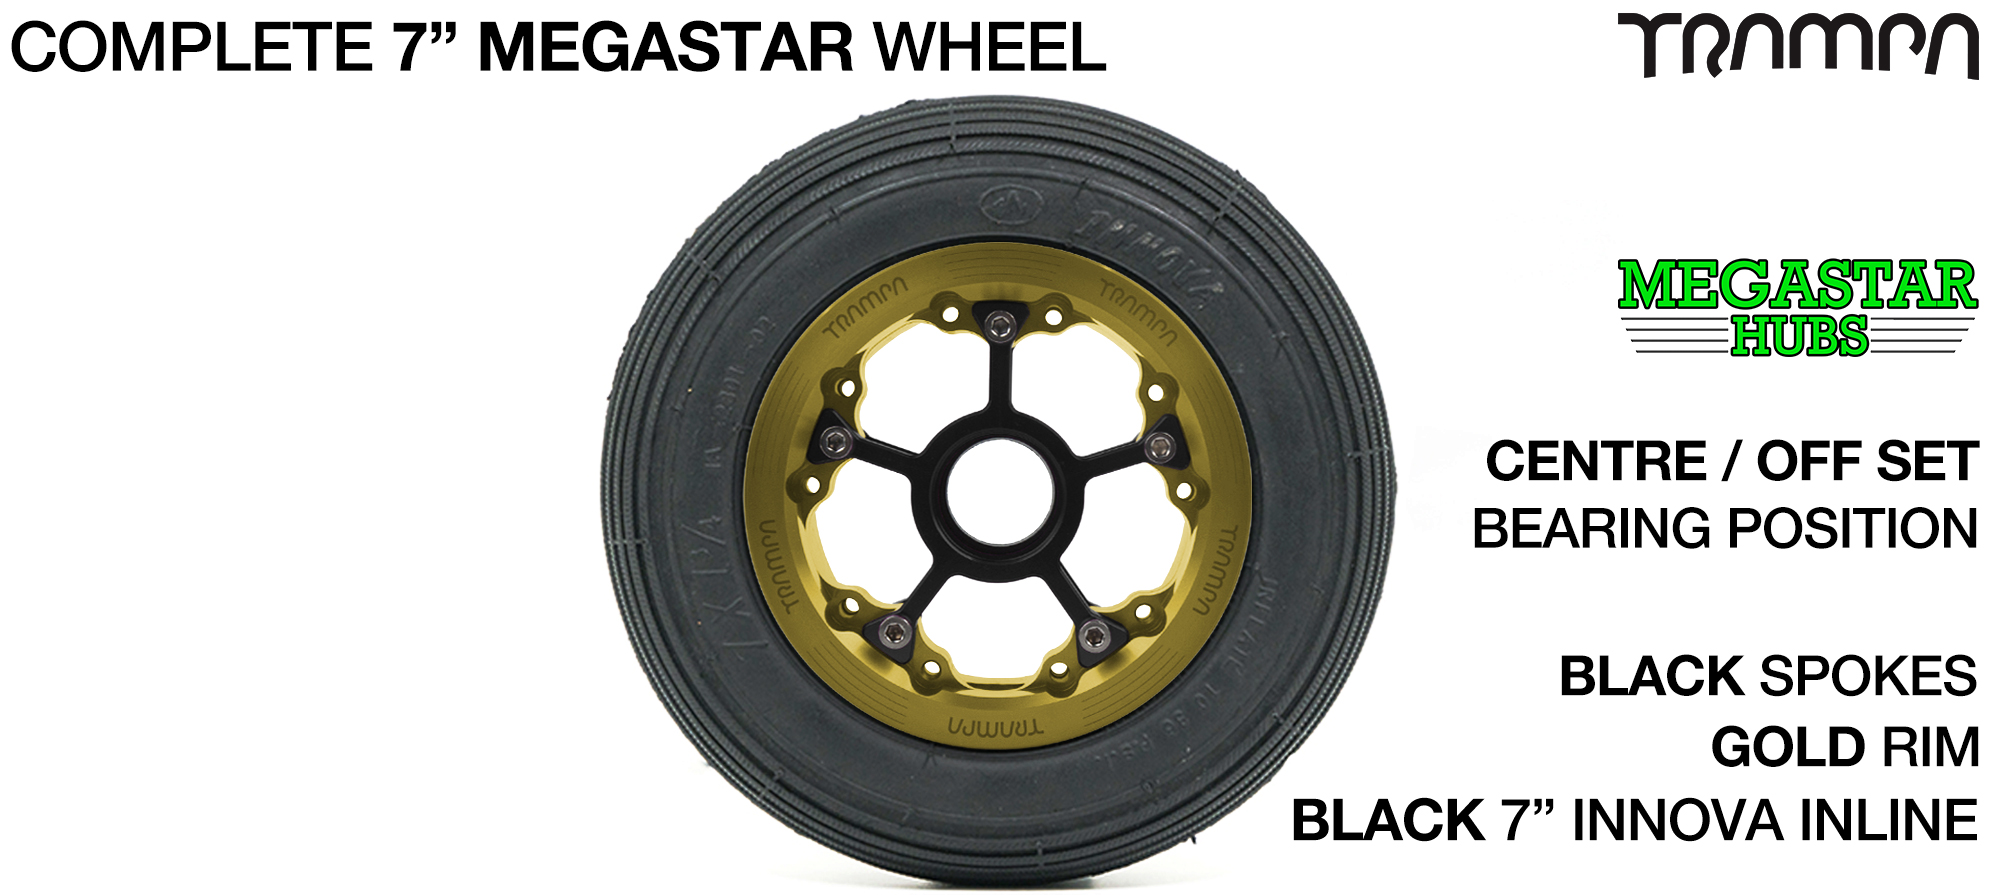 GOLD MEGASTAR Rims with BLACK Spokes & 7 Inch Tyres